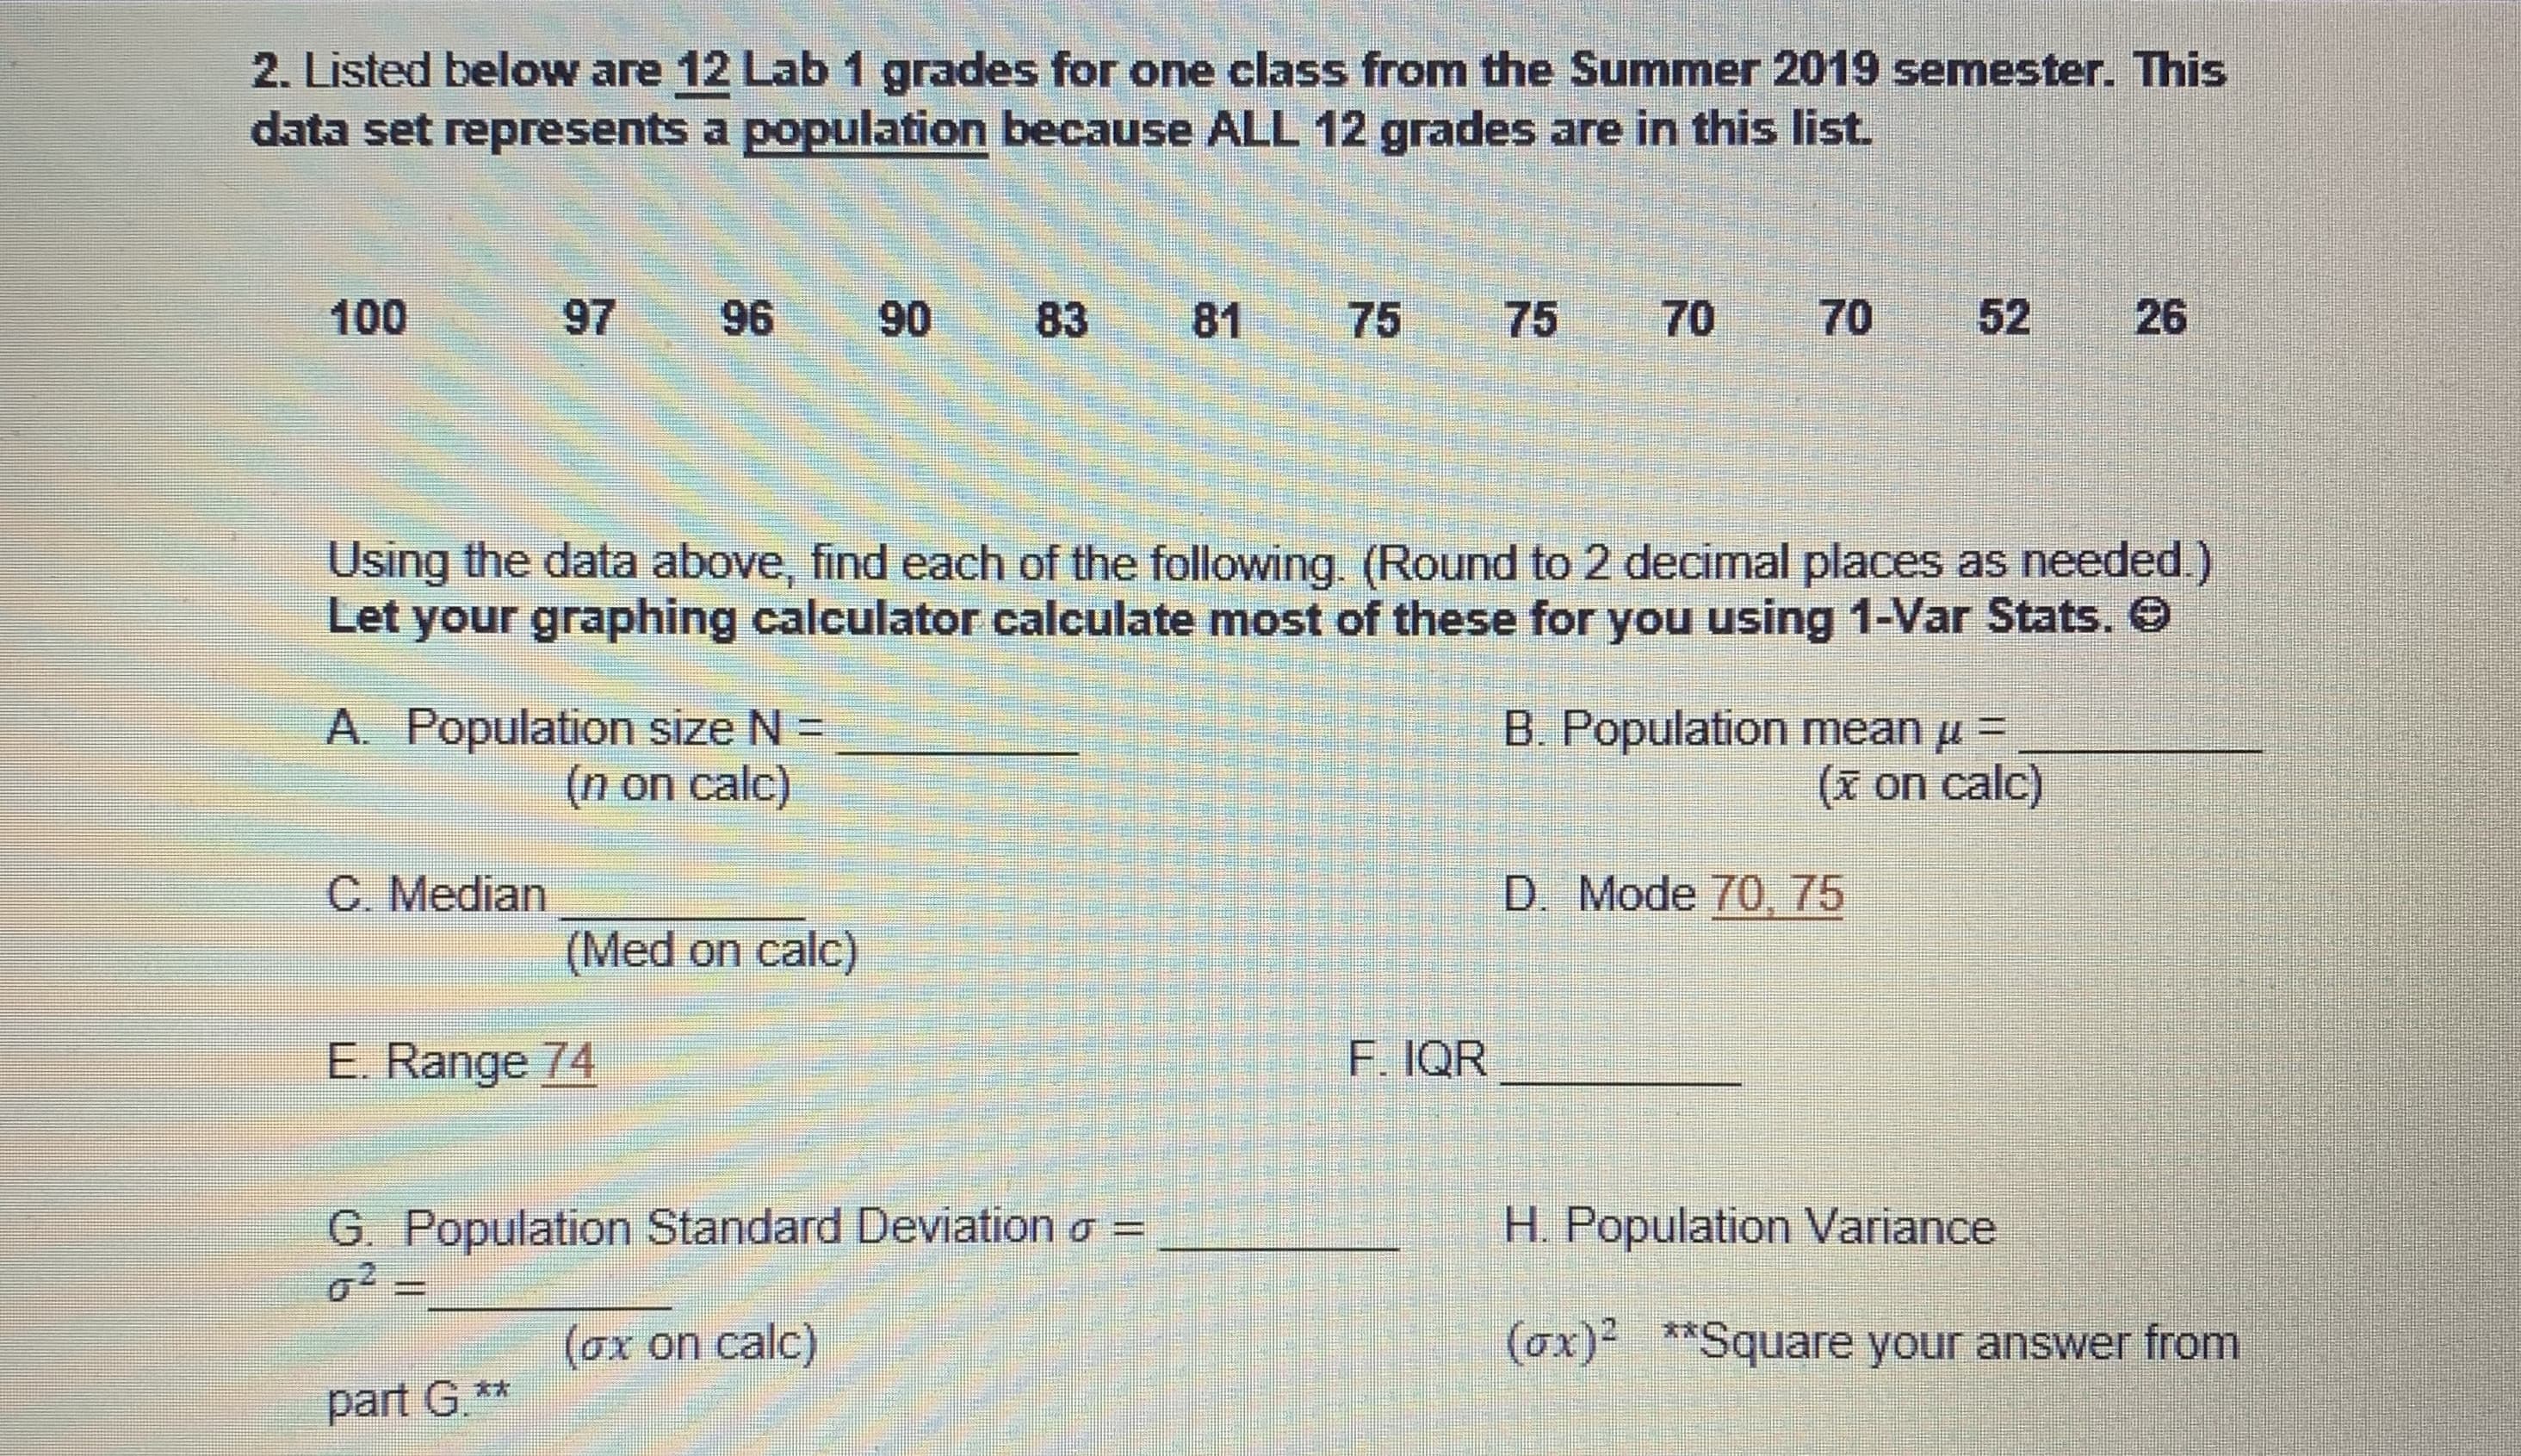 2. Listed below are 12 Lab 1 grades for one class from the Summer 2019 semester. This
data set represents a population because ALL 12 grades are in this list.
100
97
96
90
83
81
75
75
70
70
52
26
Using the data above, find each of the following. (Round to 2 decimal places as needed.)
Let your graphing calculator calculate most of these for you using 1-Var Stats. O
A. Population size N =
(n on calc)
B. Population mean u =
(x on calc)
C. Median
D. Mode 70, 75
(Med on calc)
E. Range 74
F. IQR
G. Population Standard Deviation o =
o2 =
H. Population Variance
(ox on calc)
(ox)- **Square your answer from
part G.**
